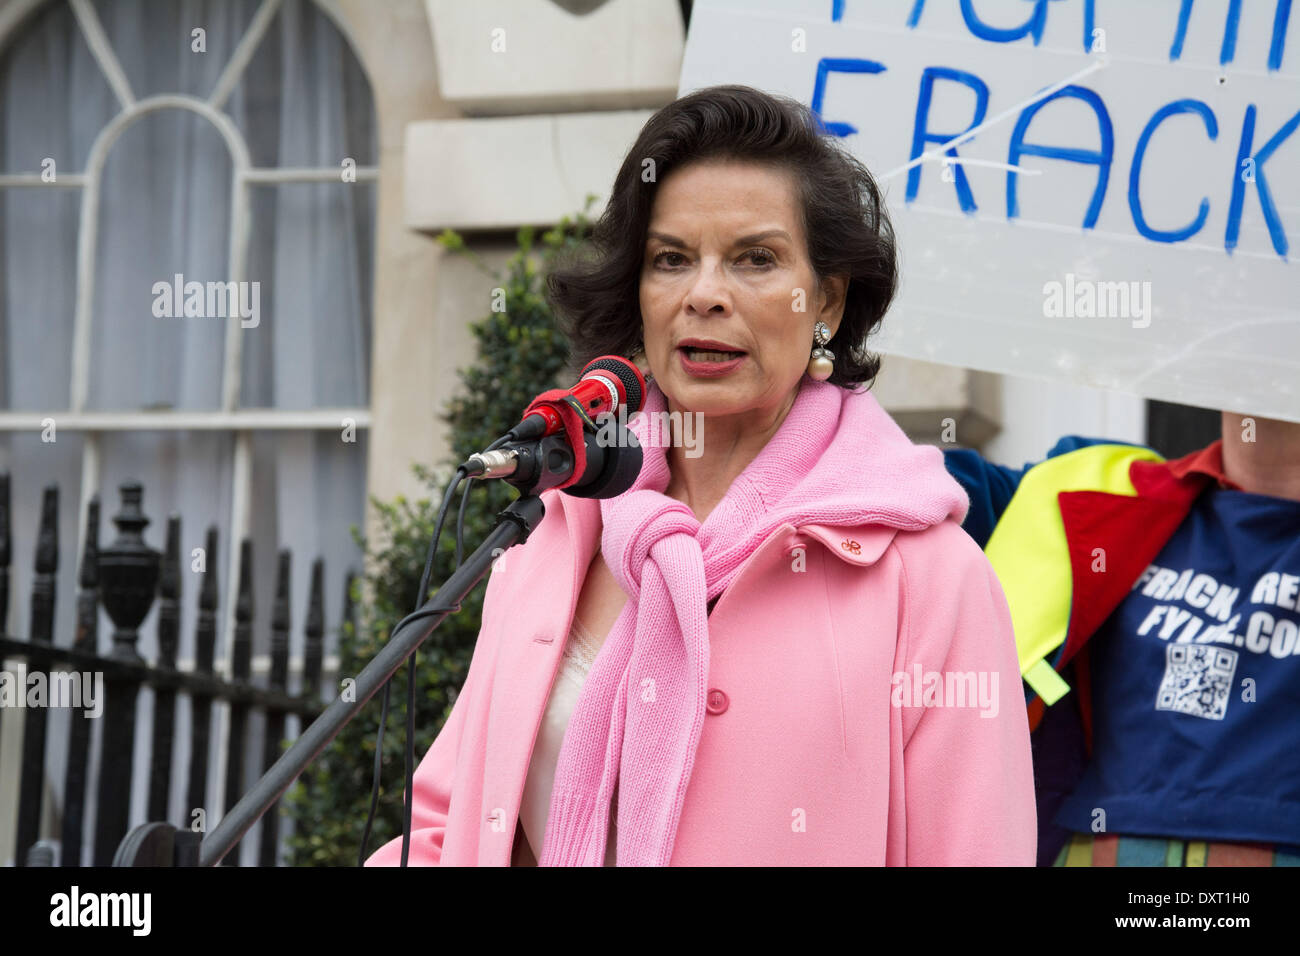 London UK. 30 March 2014. Bianca Jagger (centre, wearing pink) speaks at the Mothers Against Fracking rally at Old Palace Yard near the House of Lords in Westminster. Held to co-incide with Mothers Day, it was a family protest called to demonstrate the opposition of entire families to fracking in the UK. Credit:  Patricia Phillips/Alamy Live News Stock Photo